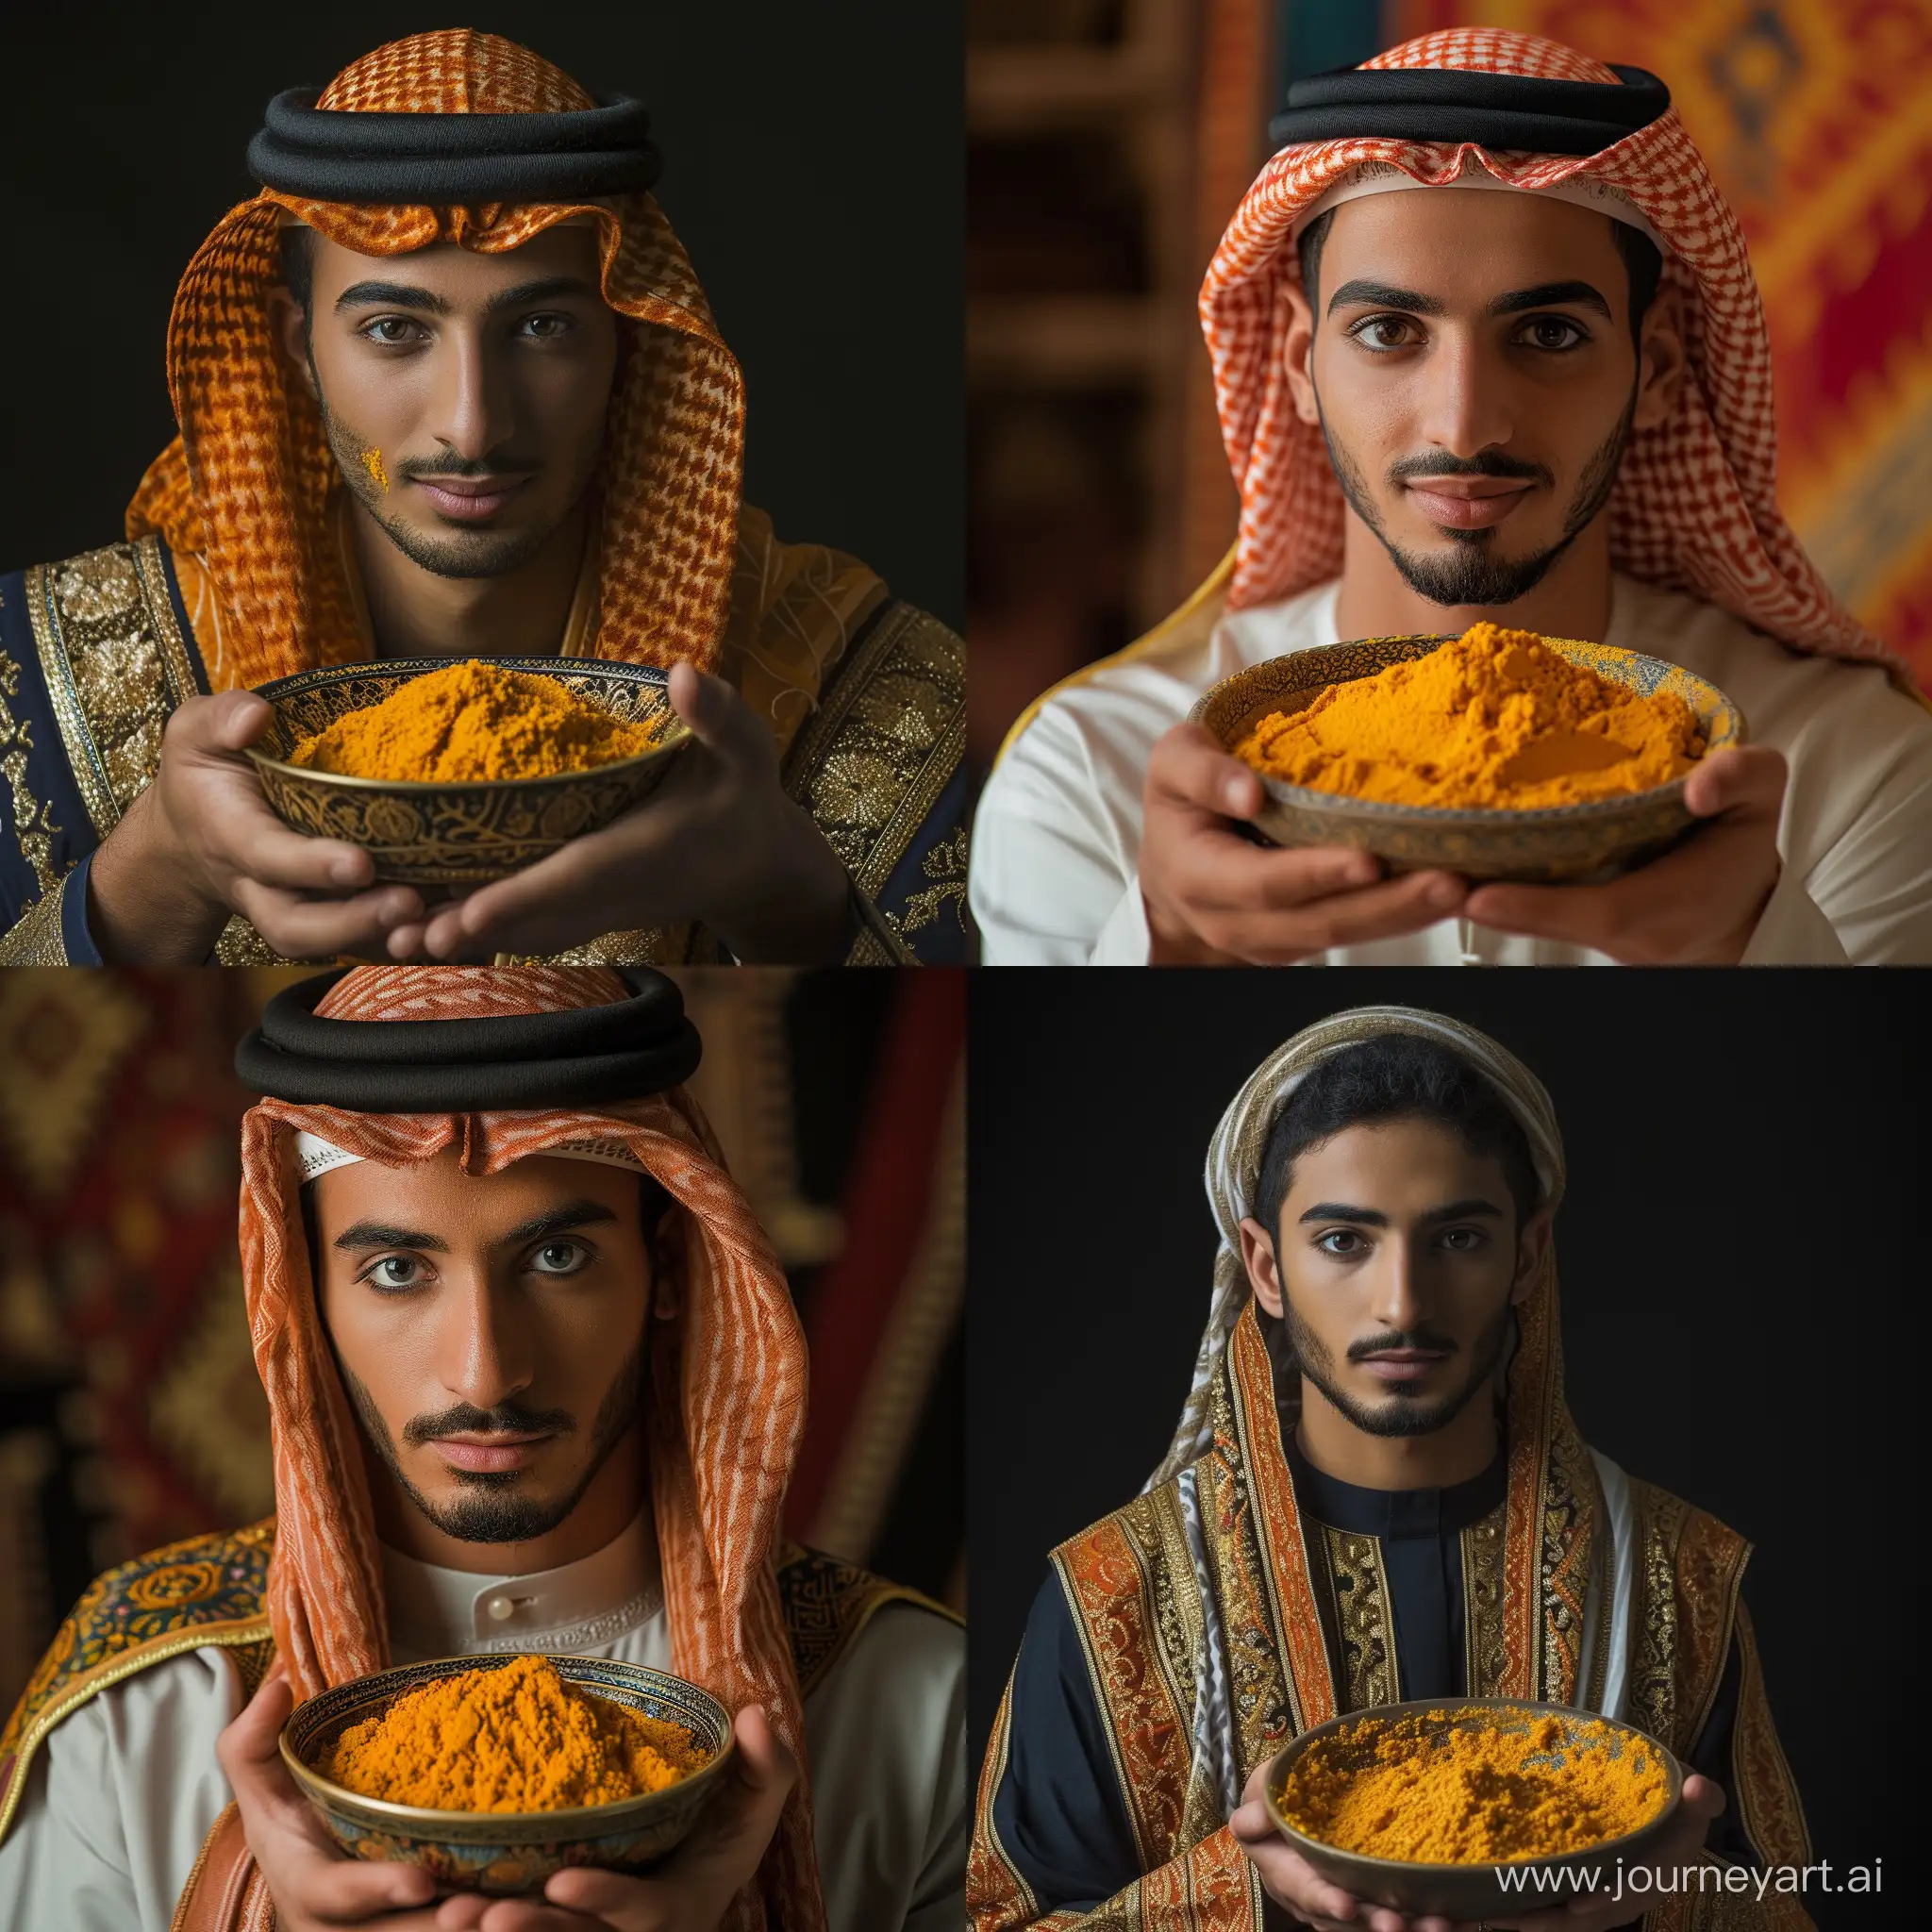 Arabic-Man-Holding-Turmeric-Bowl-Authentic-Cultural-Image